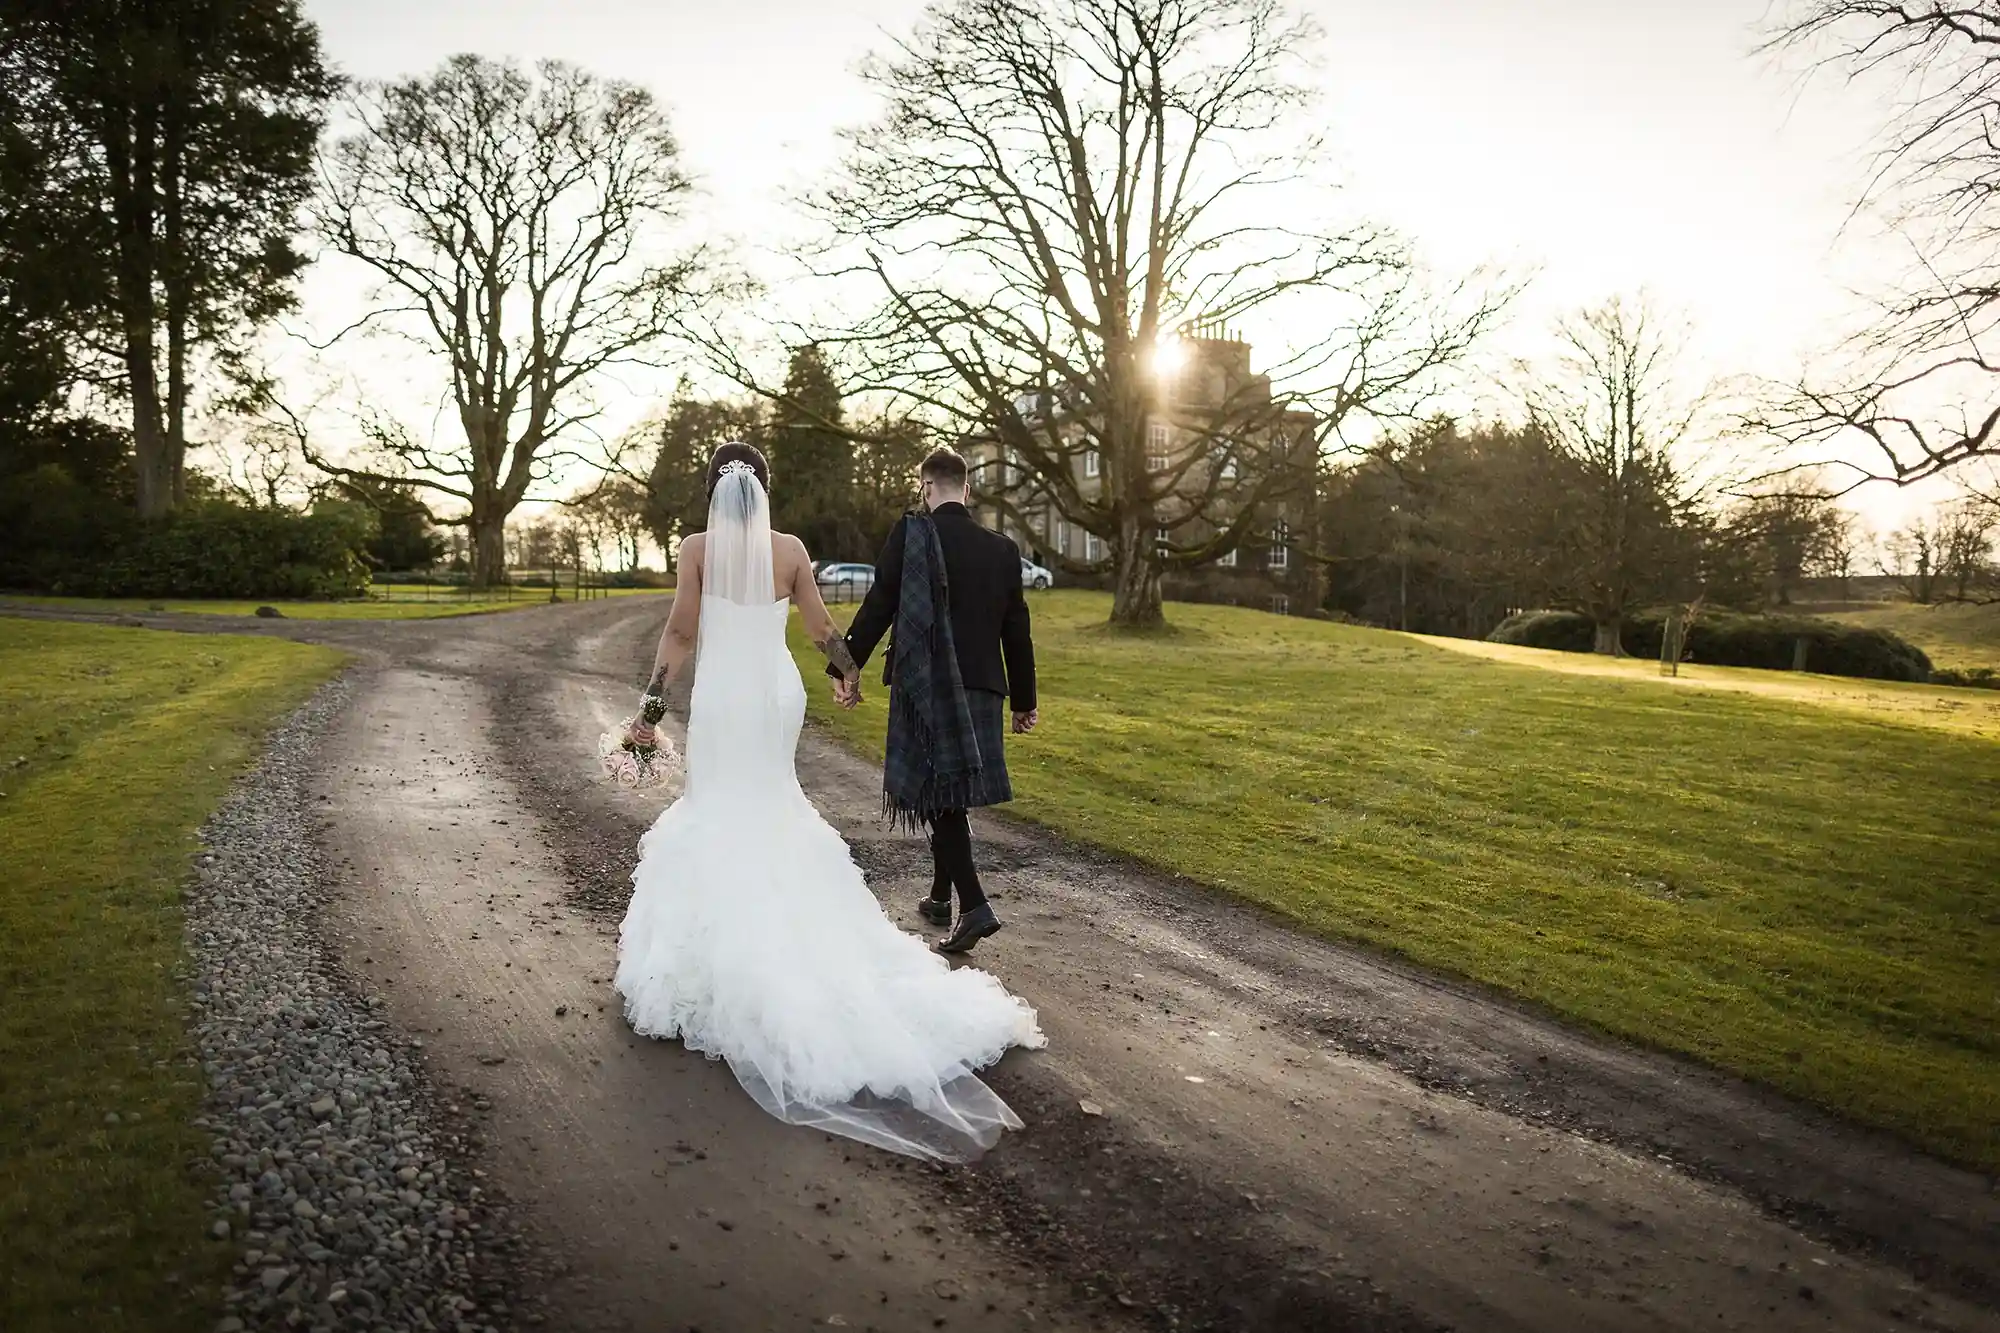 A bride and groom holding hands while walking down a tree-lined pathway at sunset.